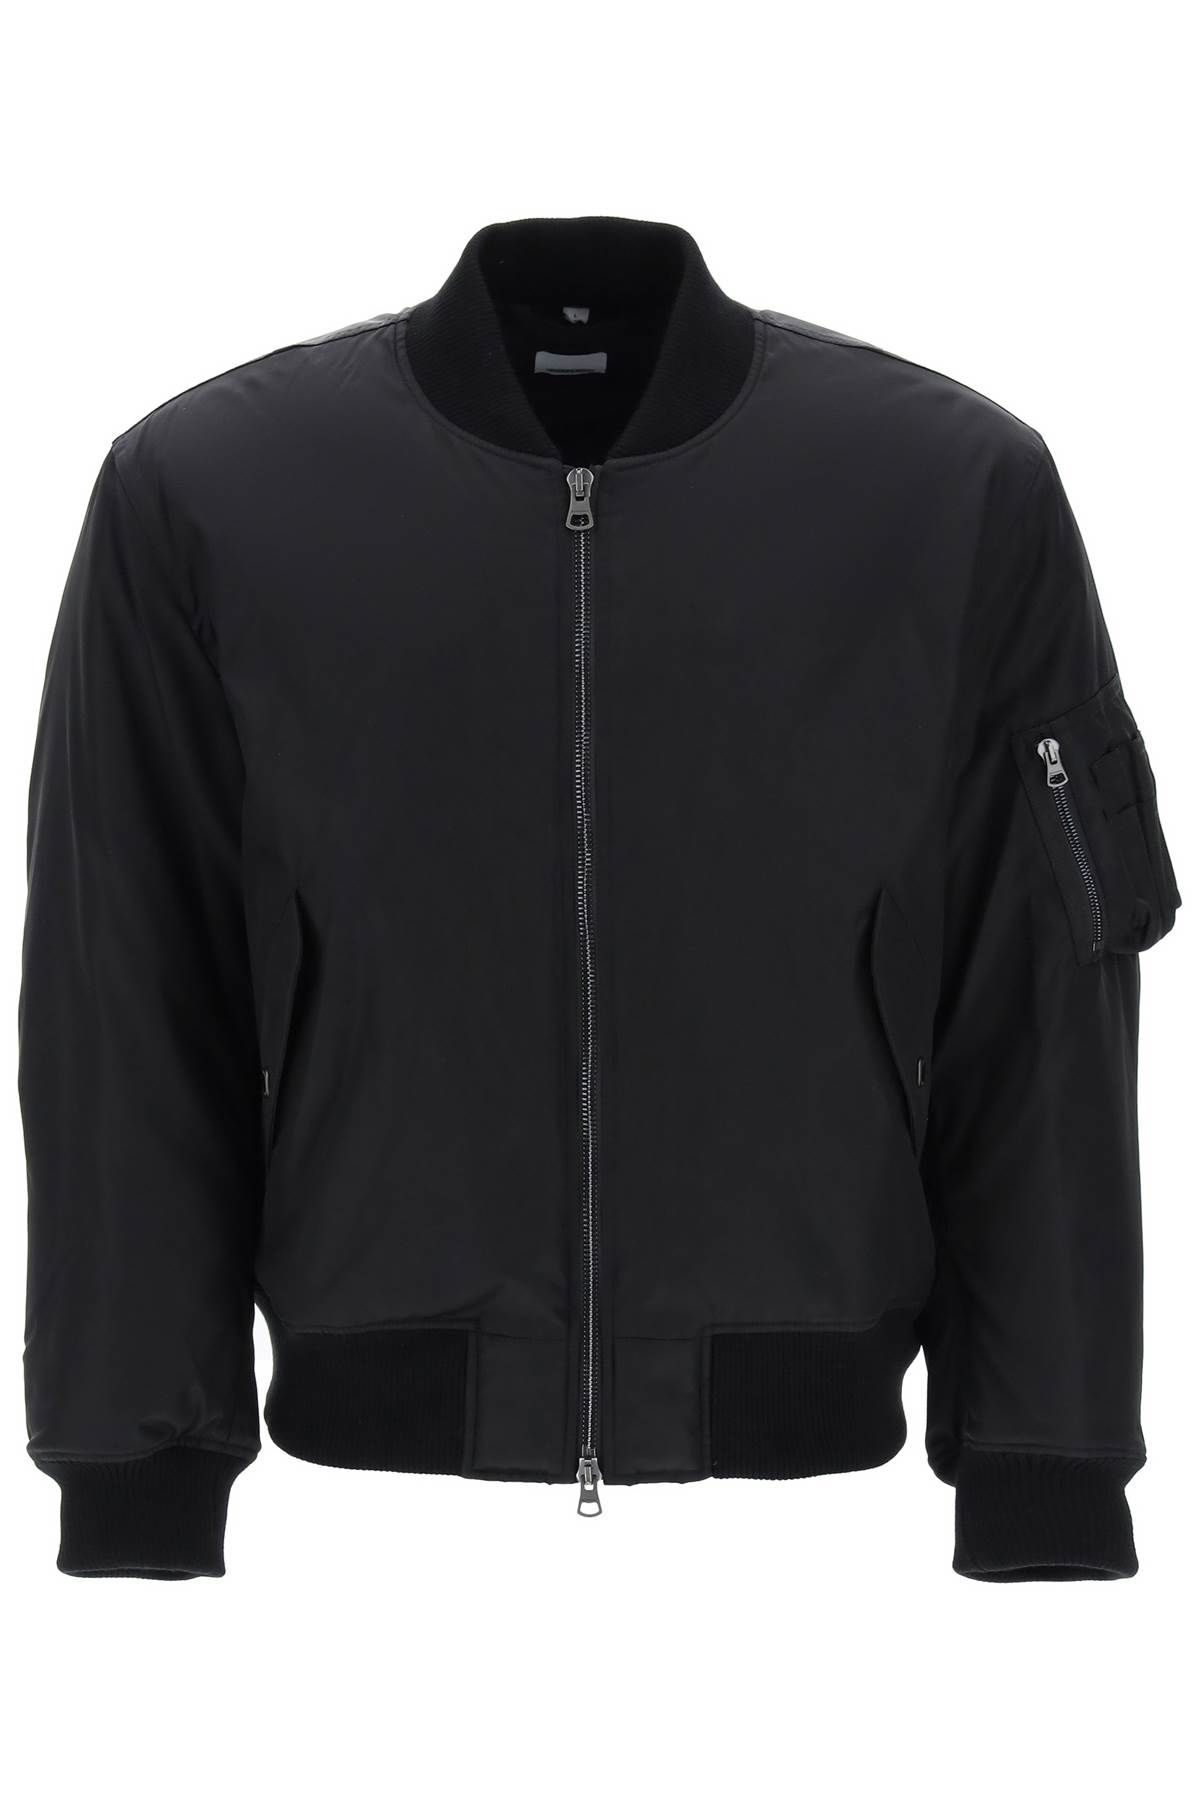 Burberry 'graves' Padded Bomber Jacket With Back Emblem Embroidery In Black